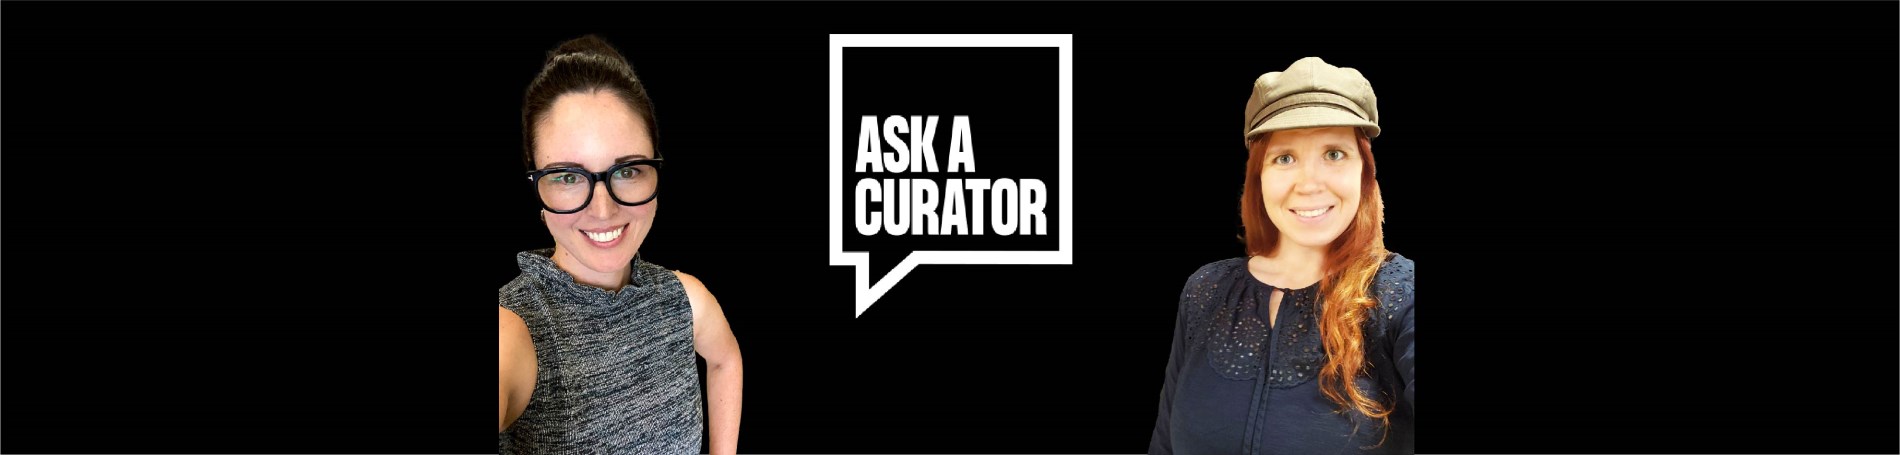 Black banner with two women and title, "Ask A Curator".